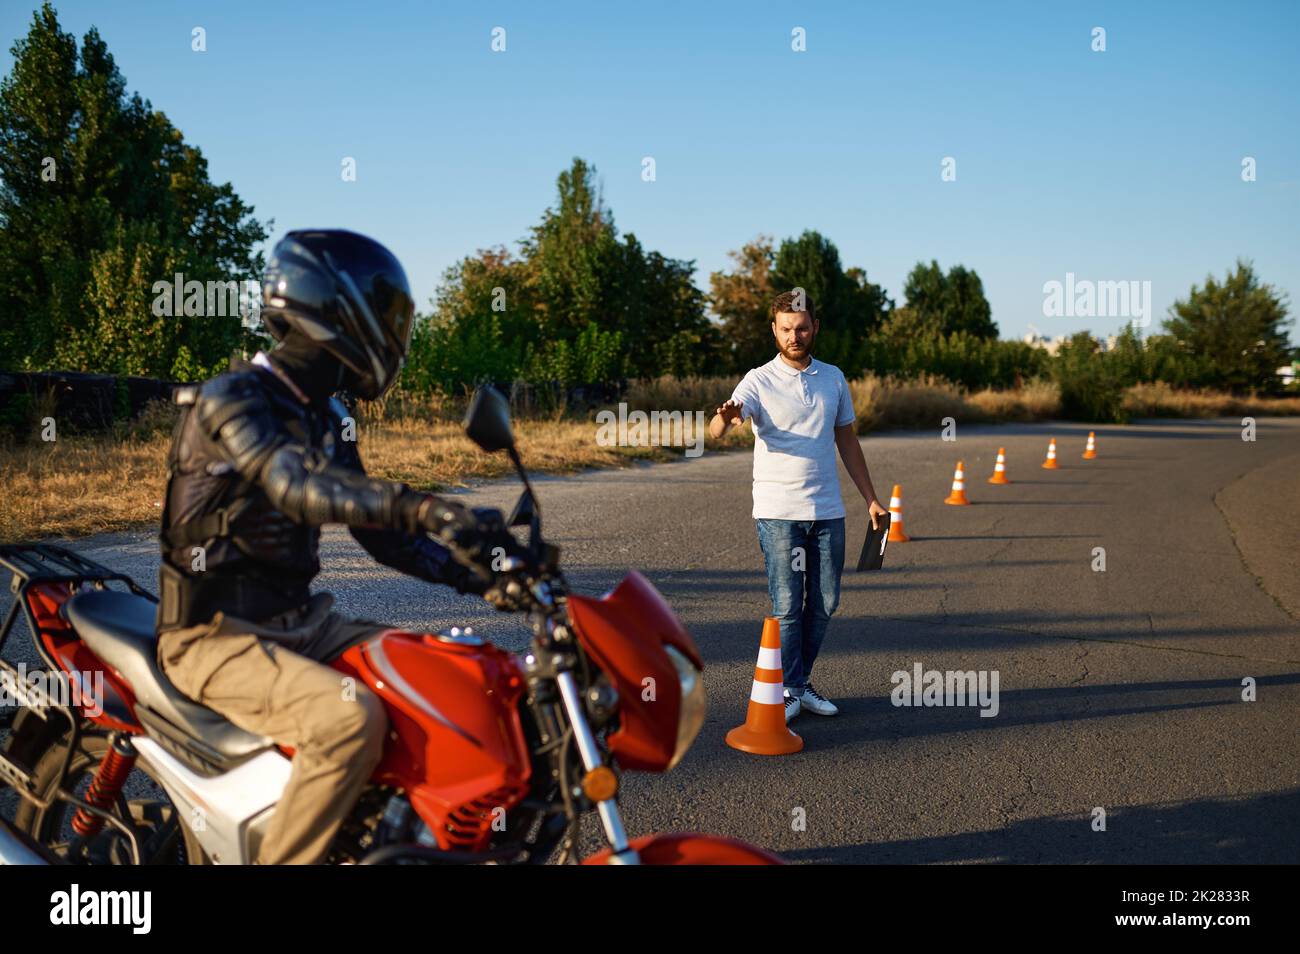 Driving course on motordrome, motorcycle school Stock Photo